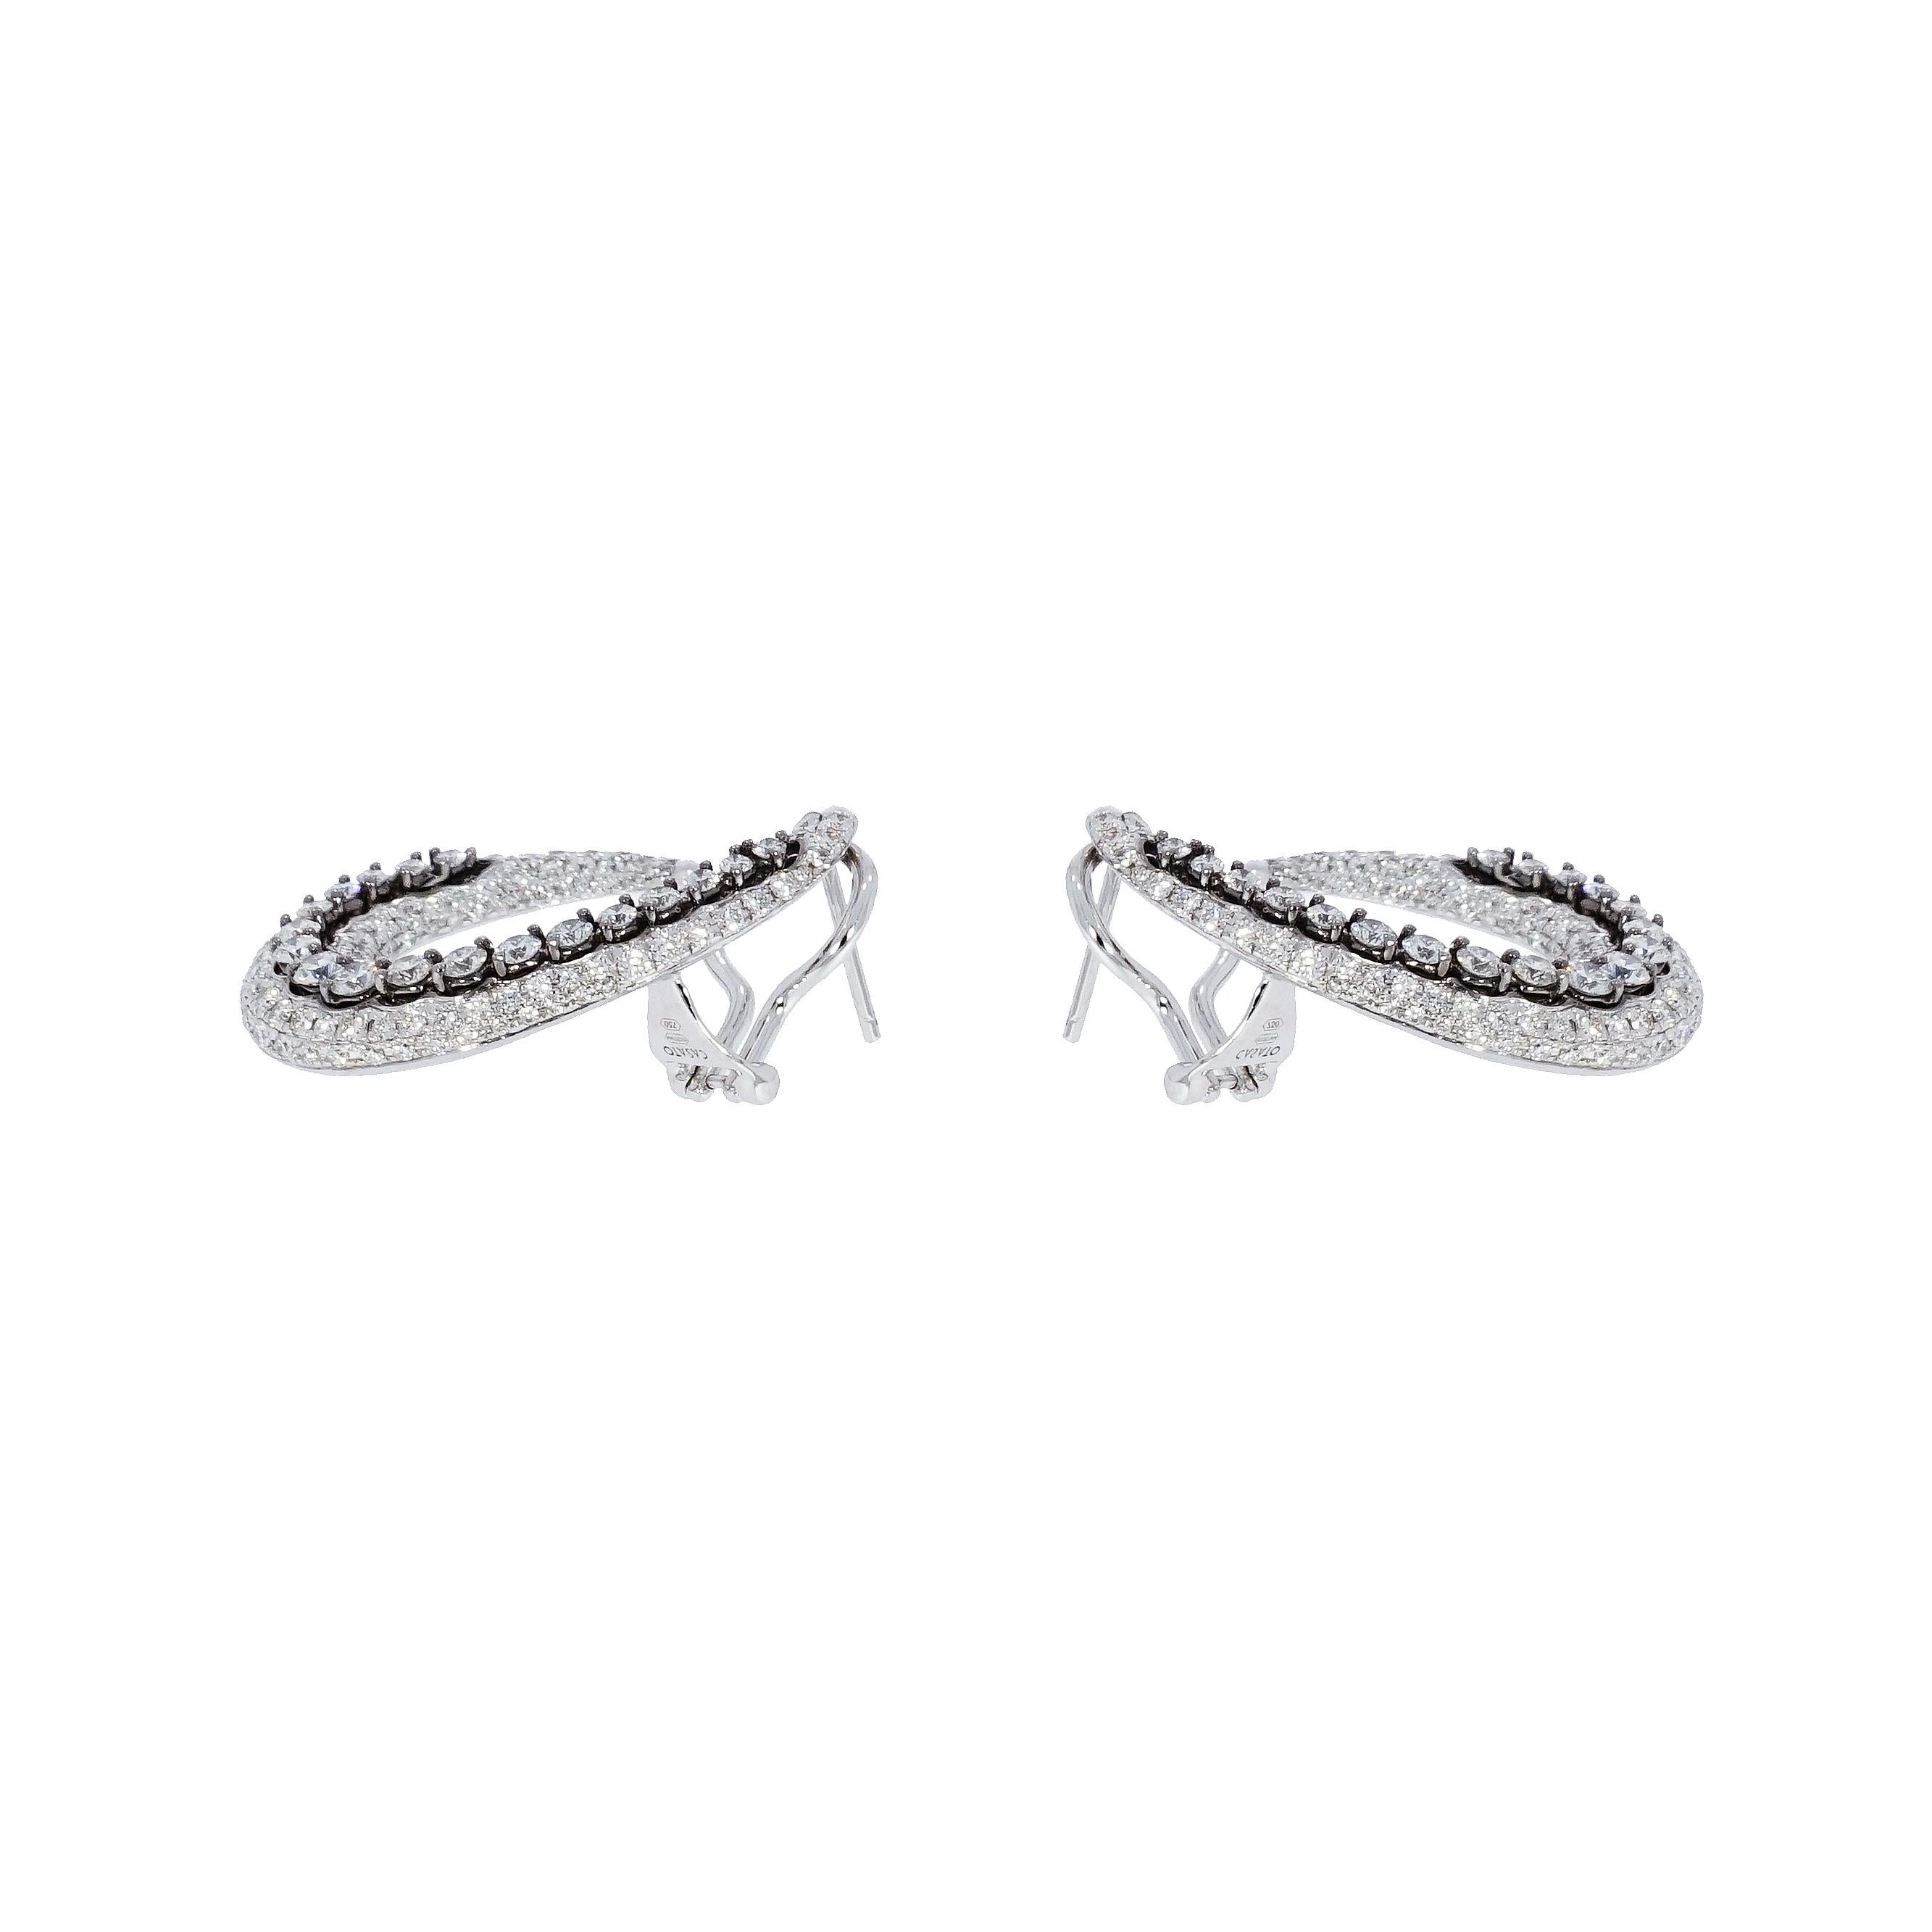 Round Cut White Gold Diamond Earrings by Casato